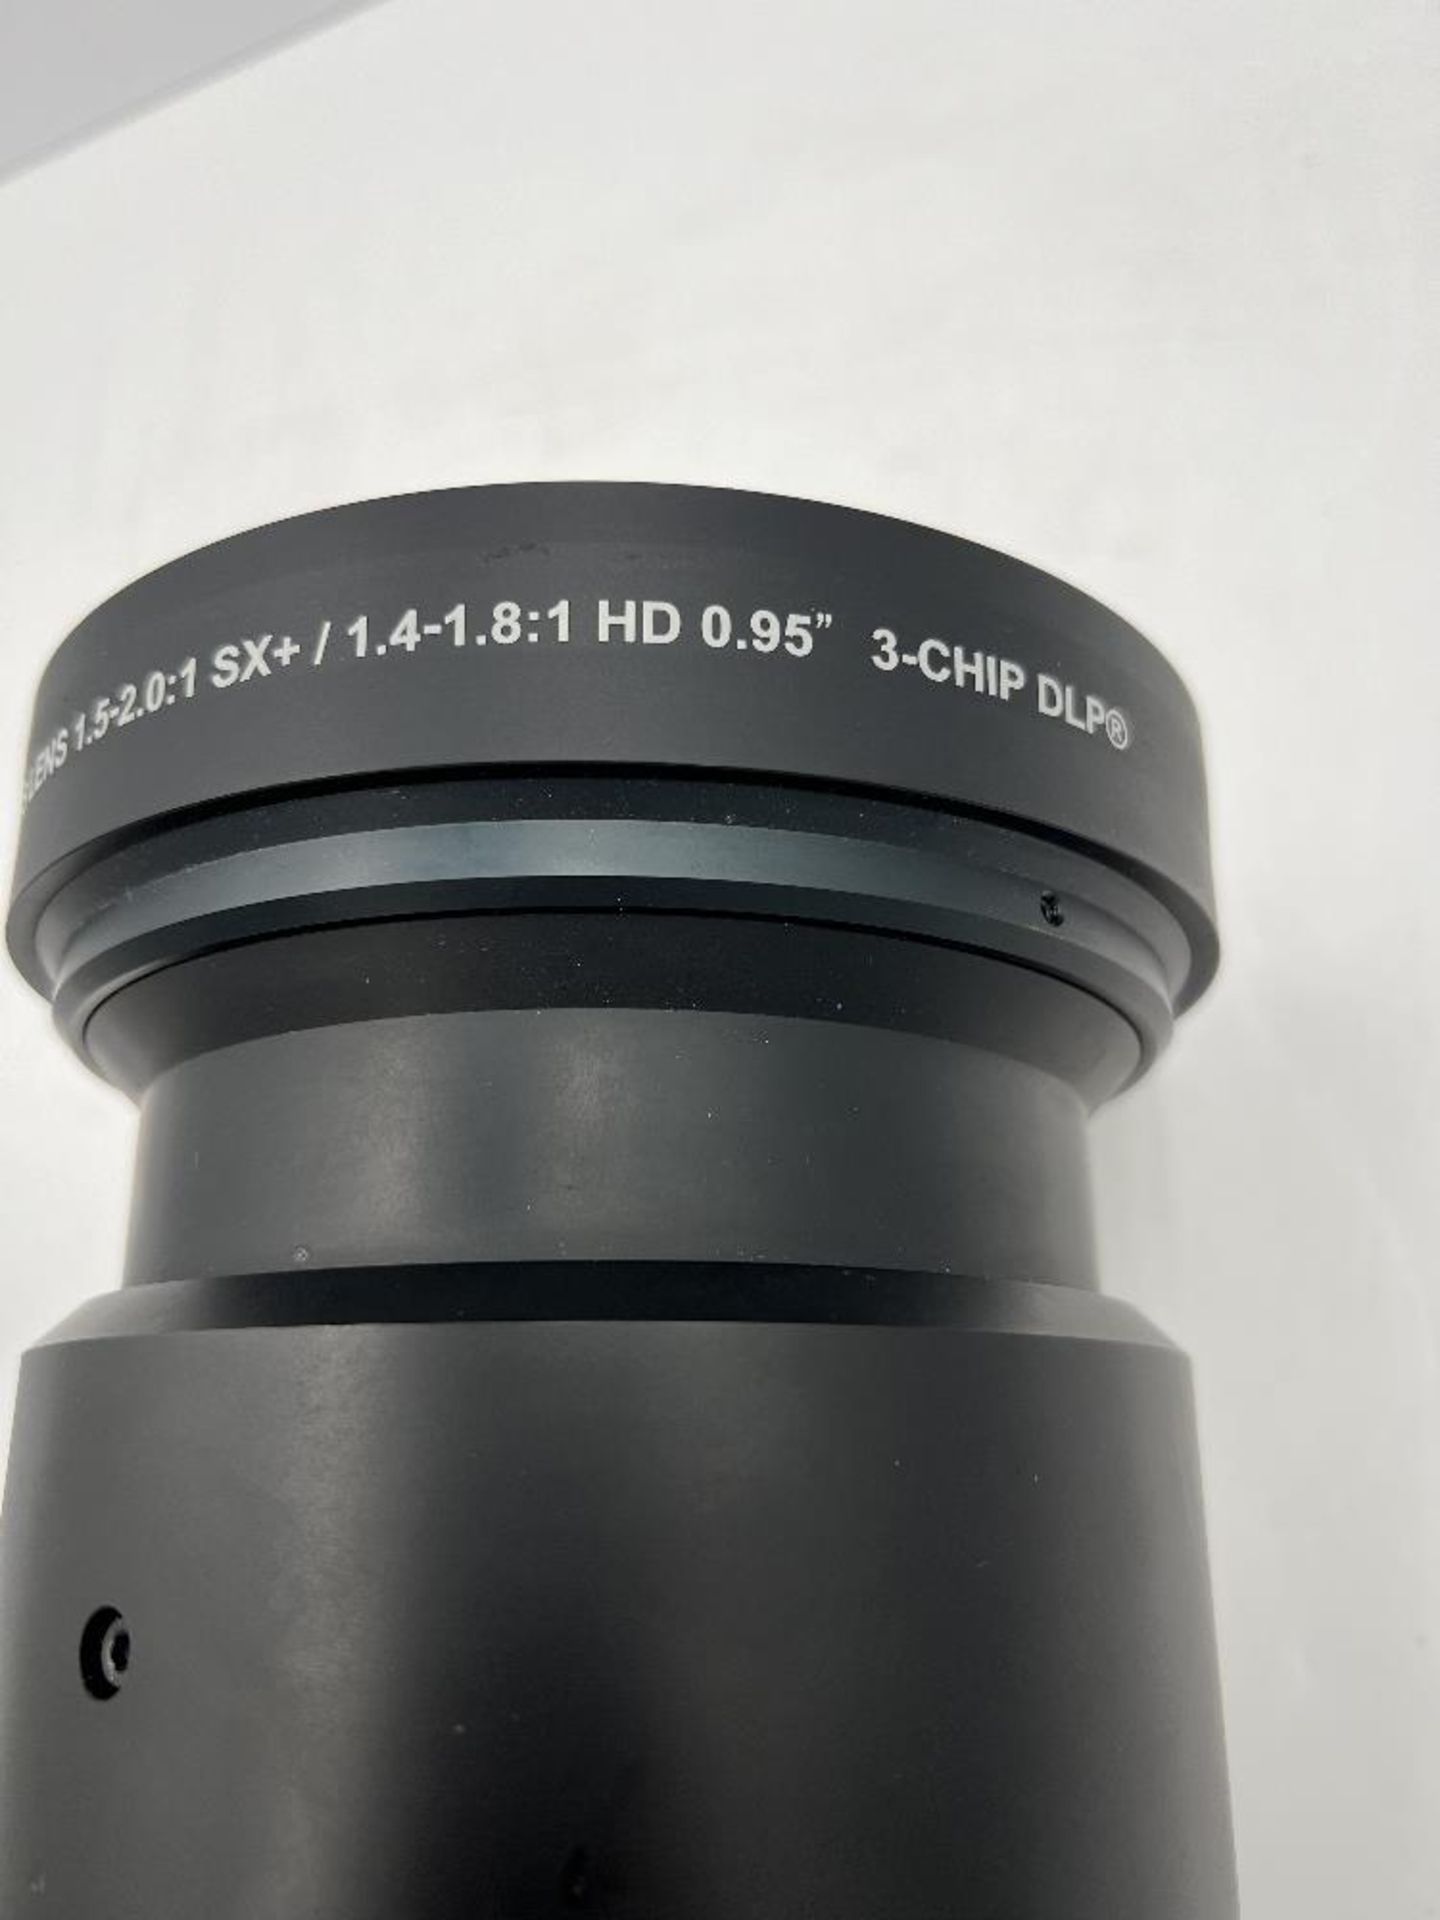 Christie M-Series HD Lens 1.4-1.8 With Flight Case - Image 6 of 9